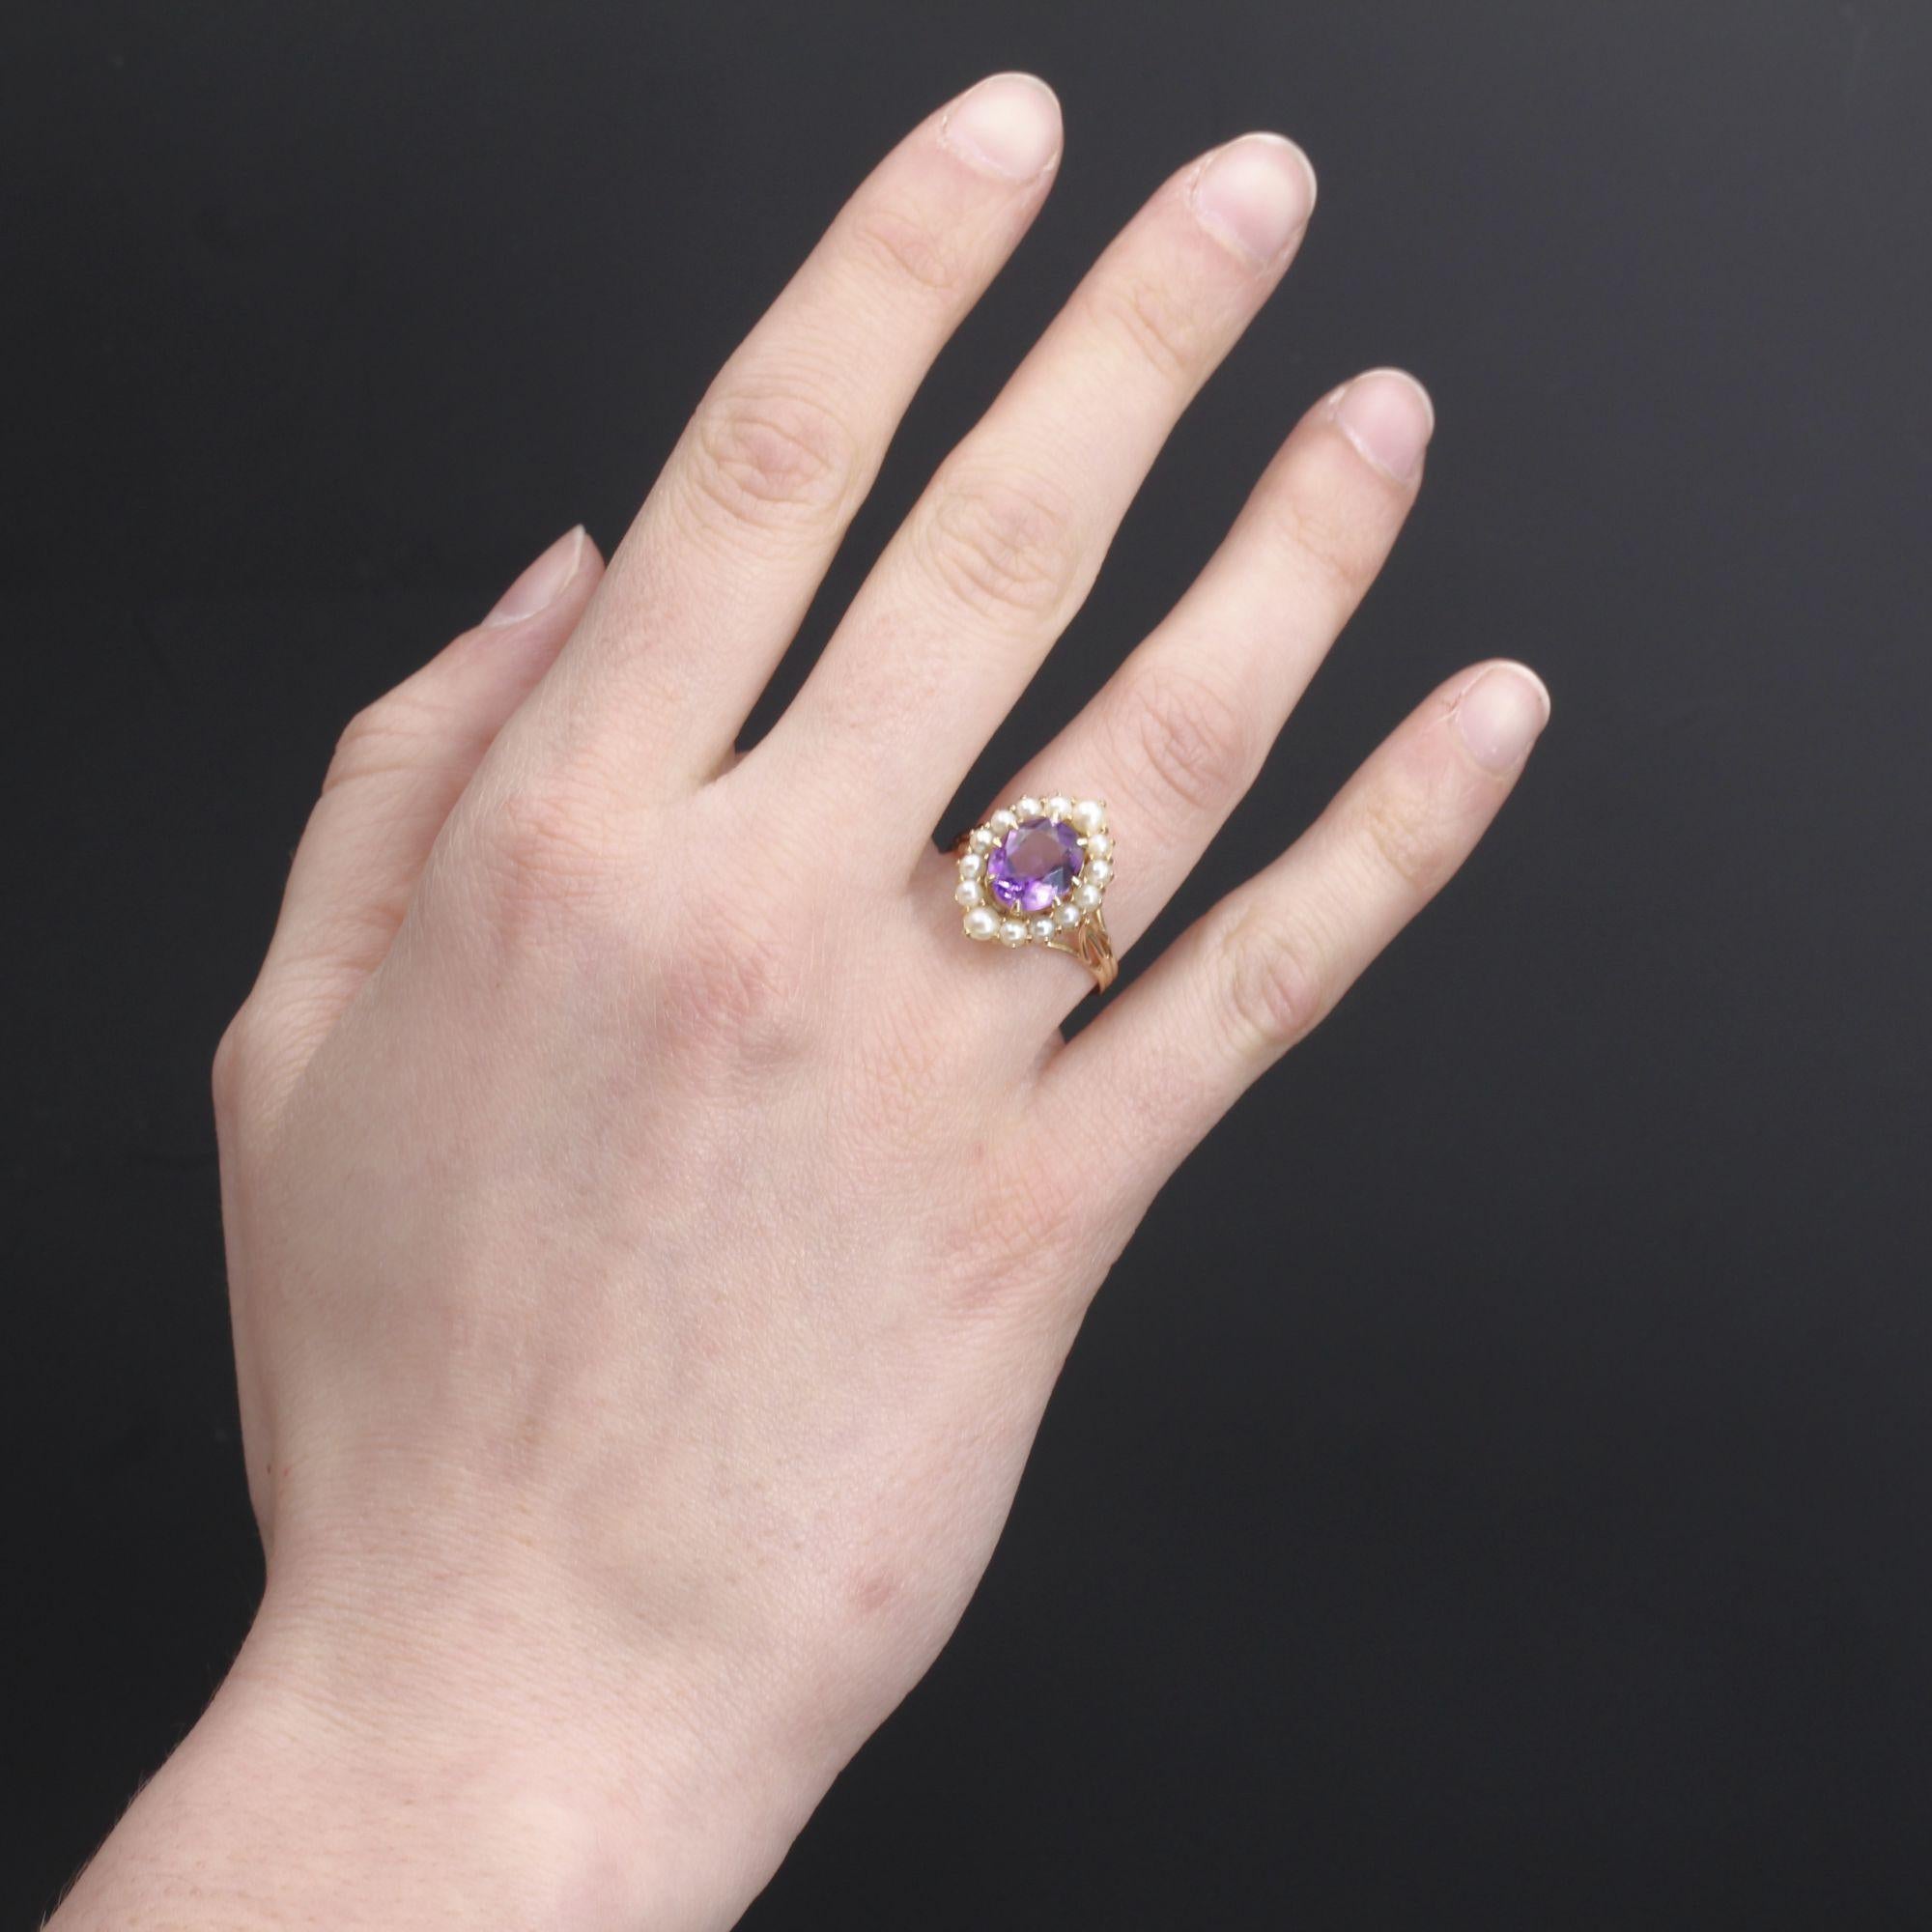 Ring in 18 karat yellow gold, eagle head hallmark.
A lovely antique ring, it is set in the center of an amethyst in a circle of half cultured pearls. The setting is made of gold wire.
Weight of the amethyst : about 1.70 carat.
Diameter of the pearls